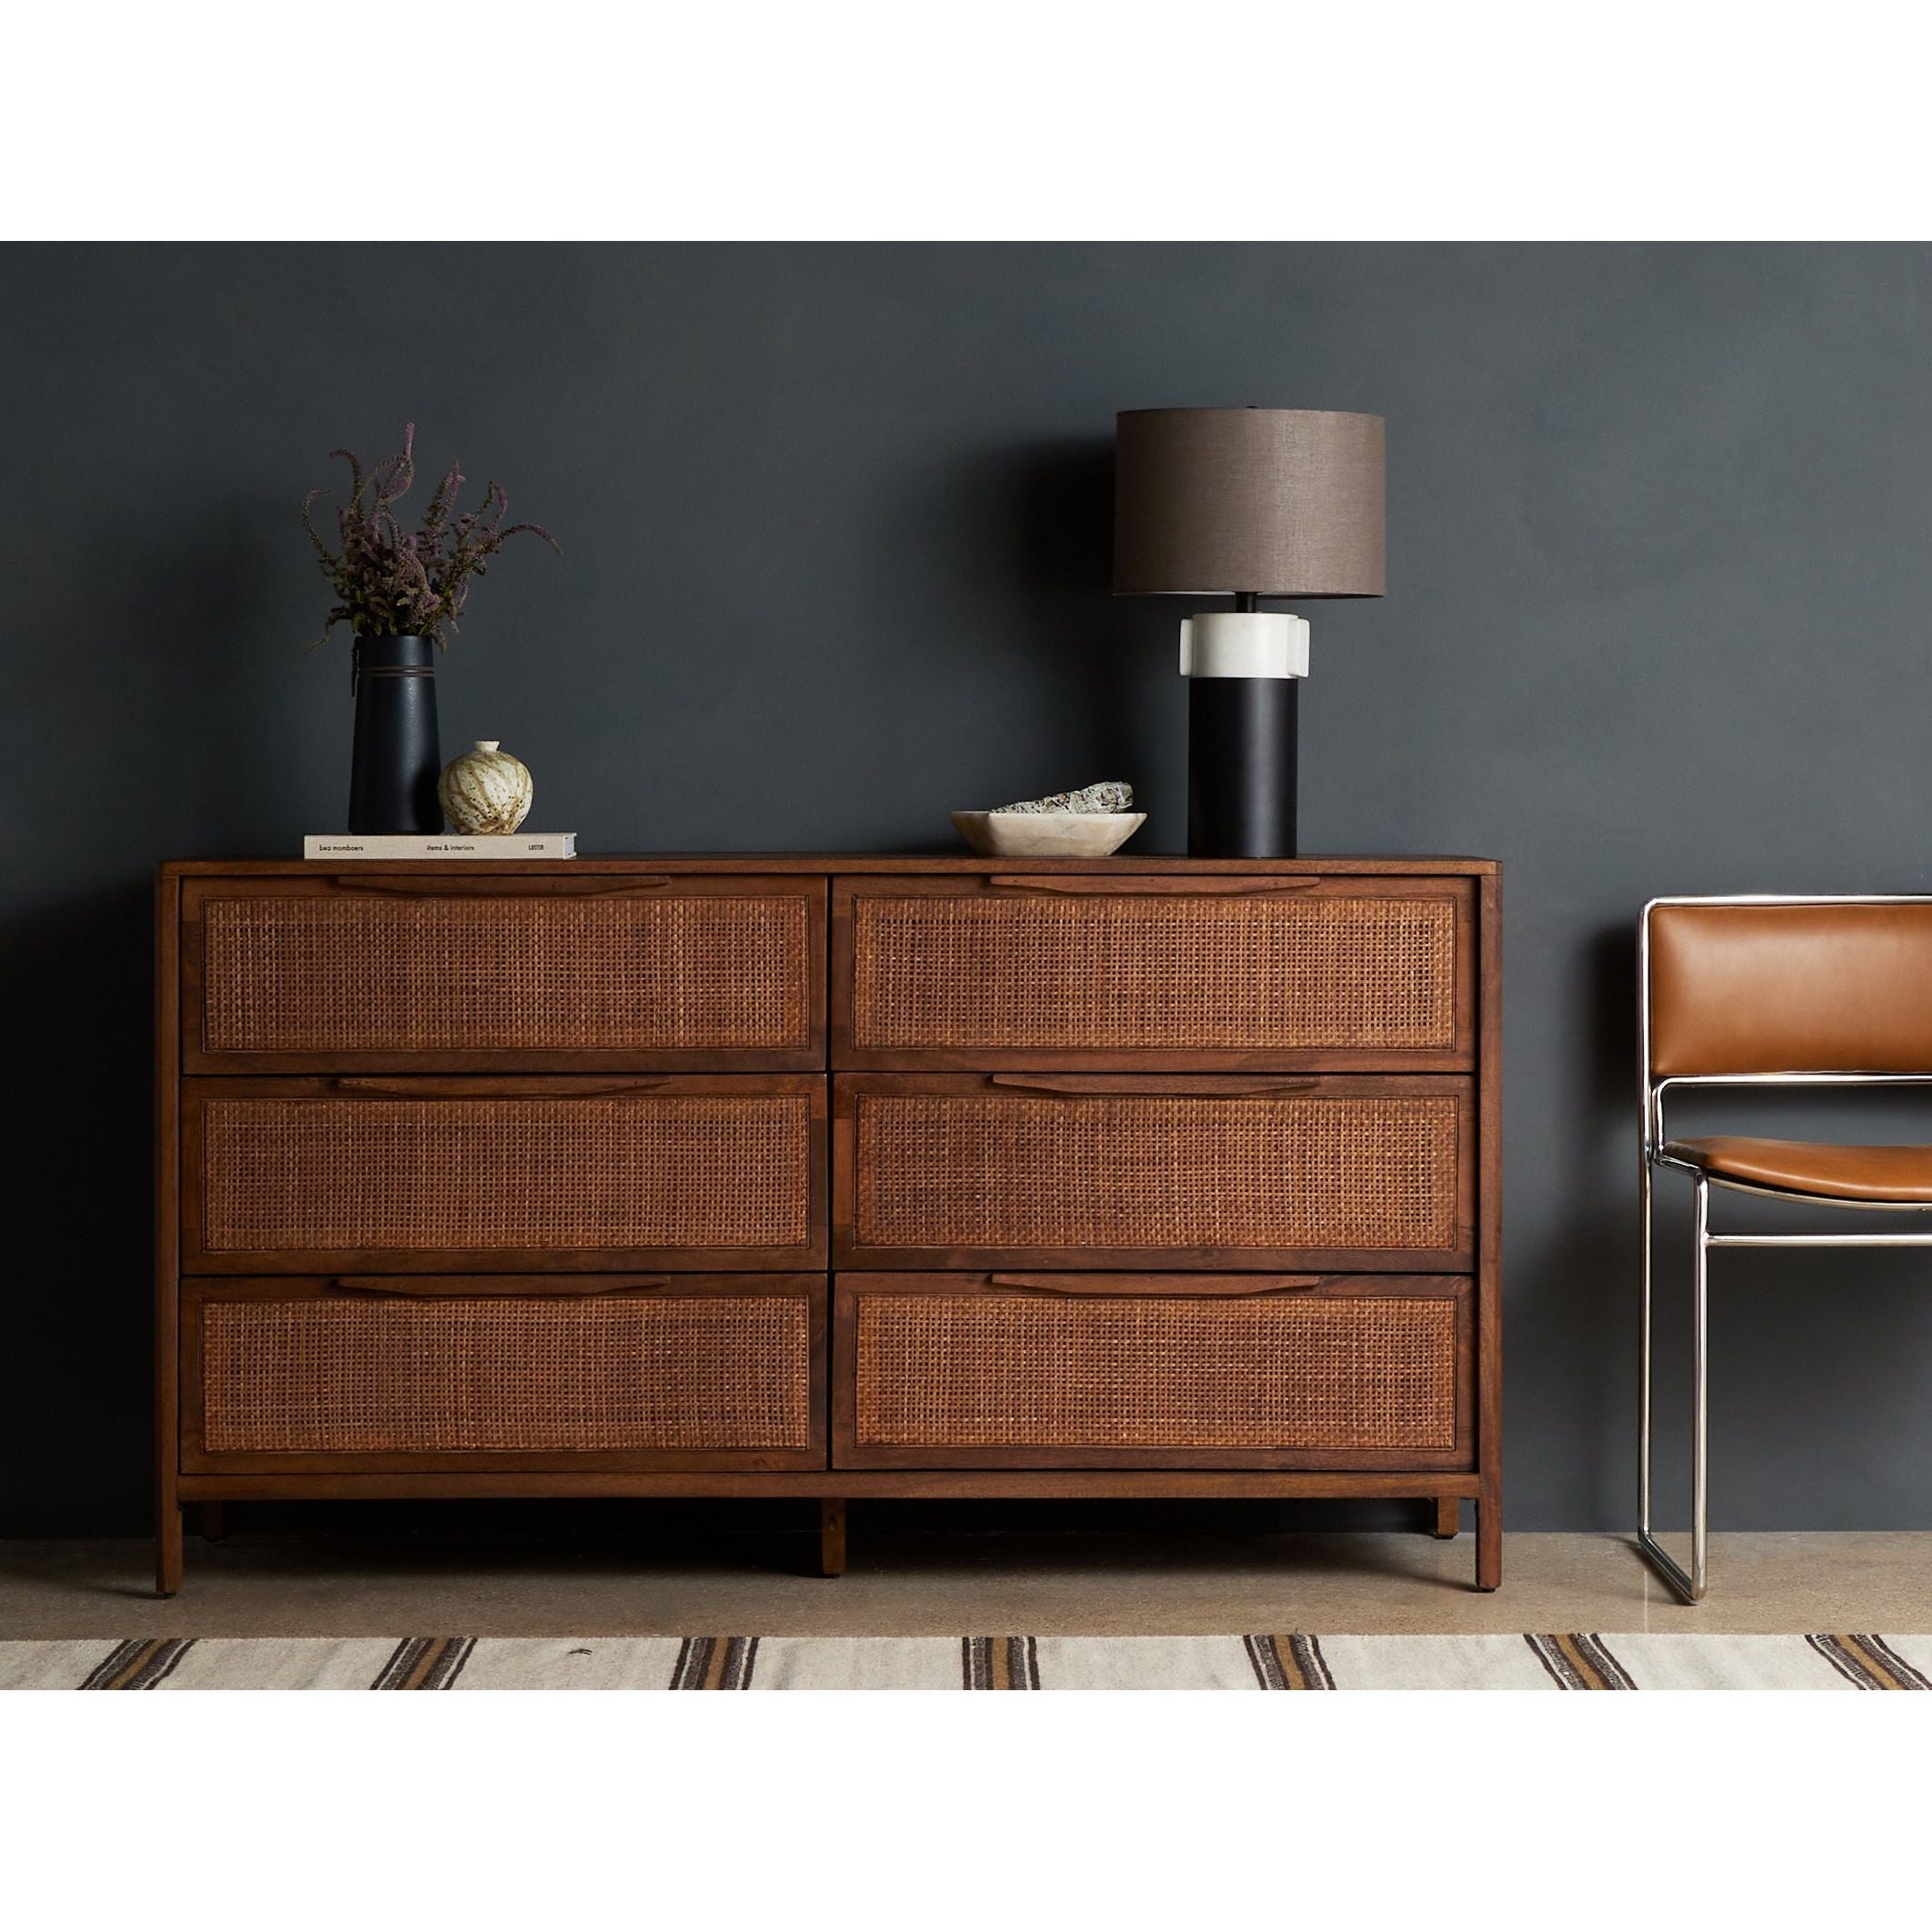 Sydney Brown Wash Drawer Dresser encases six spacious drawers of woven cane, for a textural look with monochromatic vibes. Amethyst Home provides interior design services, furniture, rugs, and lighting in the Monterey metro area.